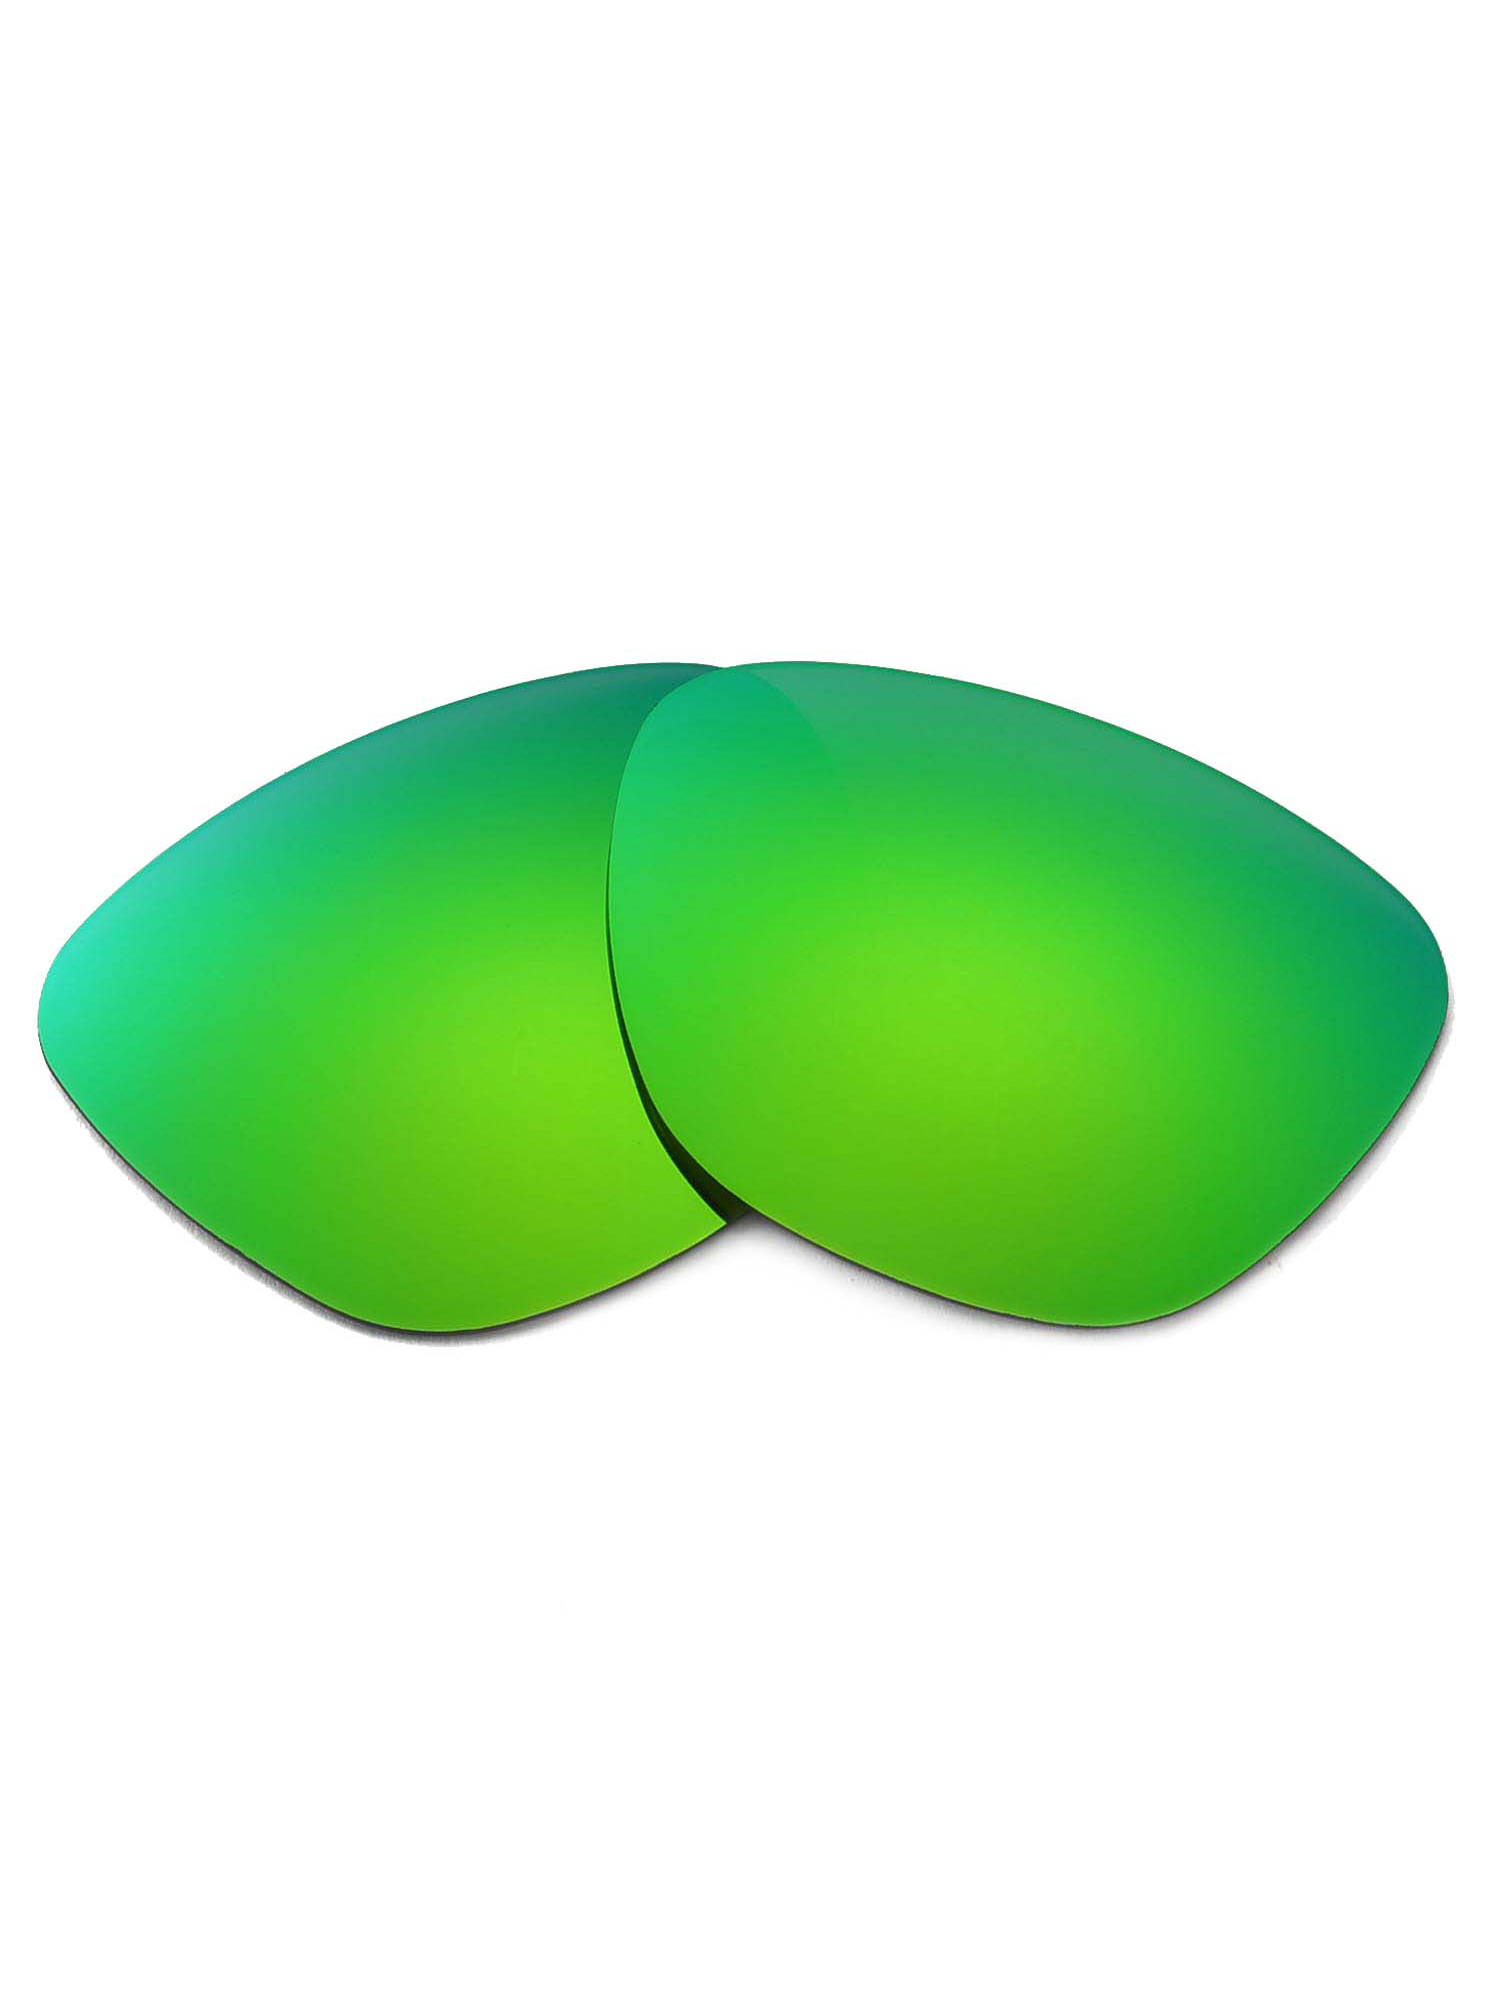 Walleva Emerald Polarized Replacement Lenses for Oakley Frogskins Sunglasses - image 2 of 6